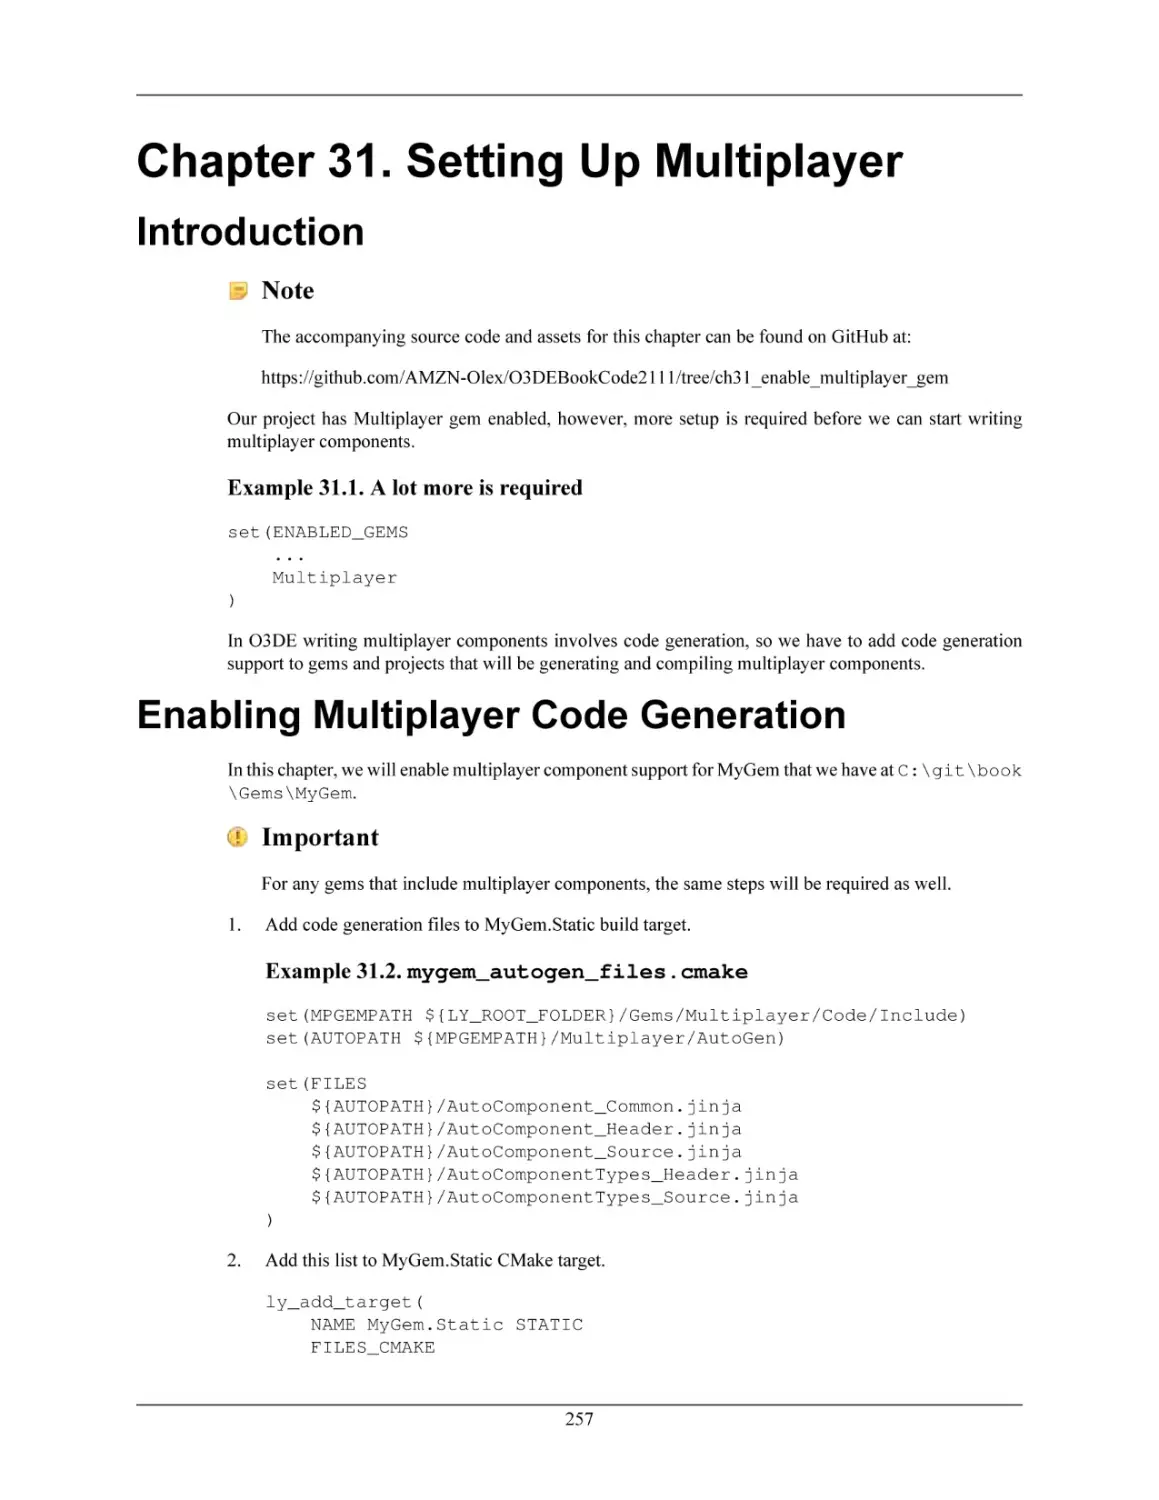 Chapter 31. Setting Up Multiplayer
Introduction
Enabling Multiplayer Code Generation